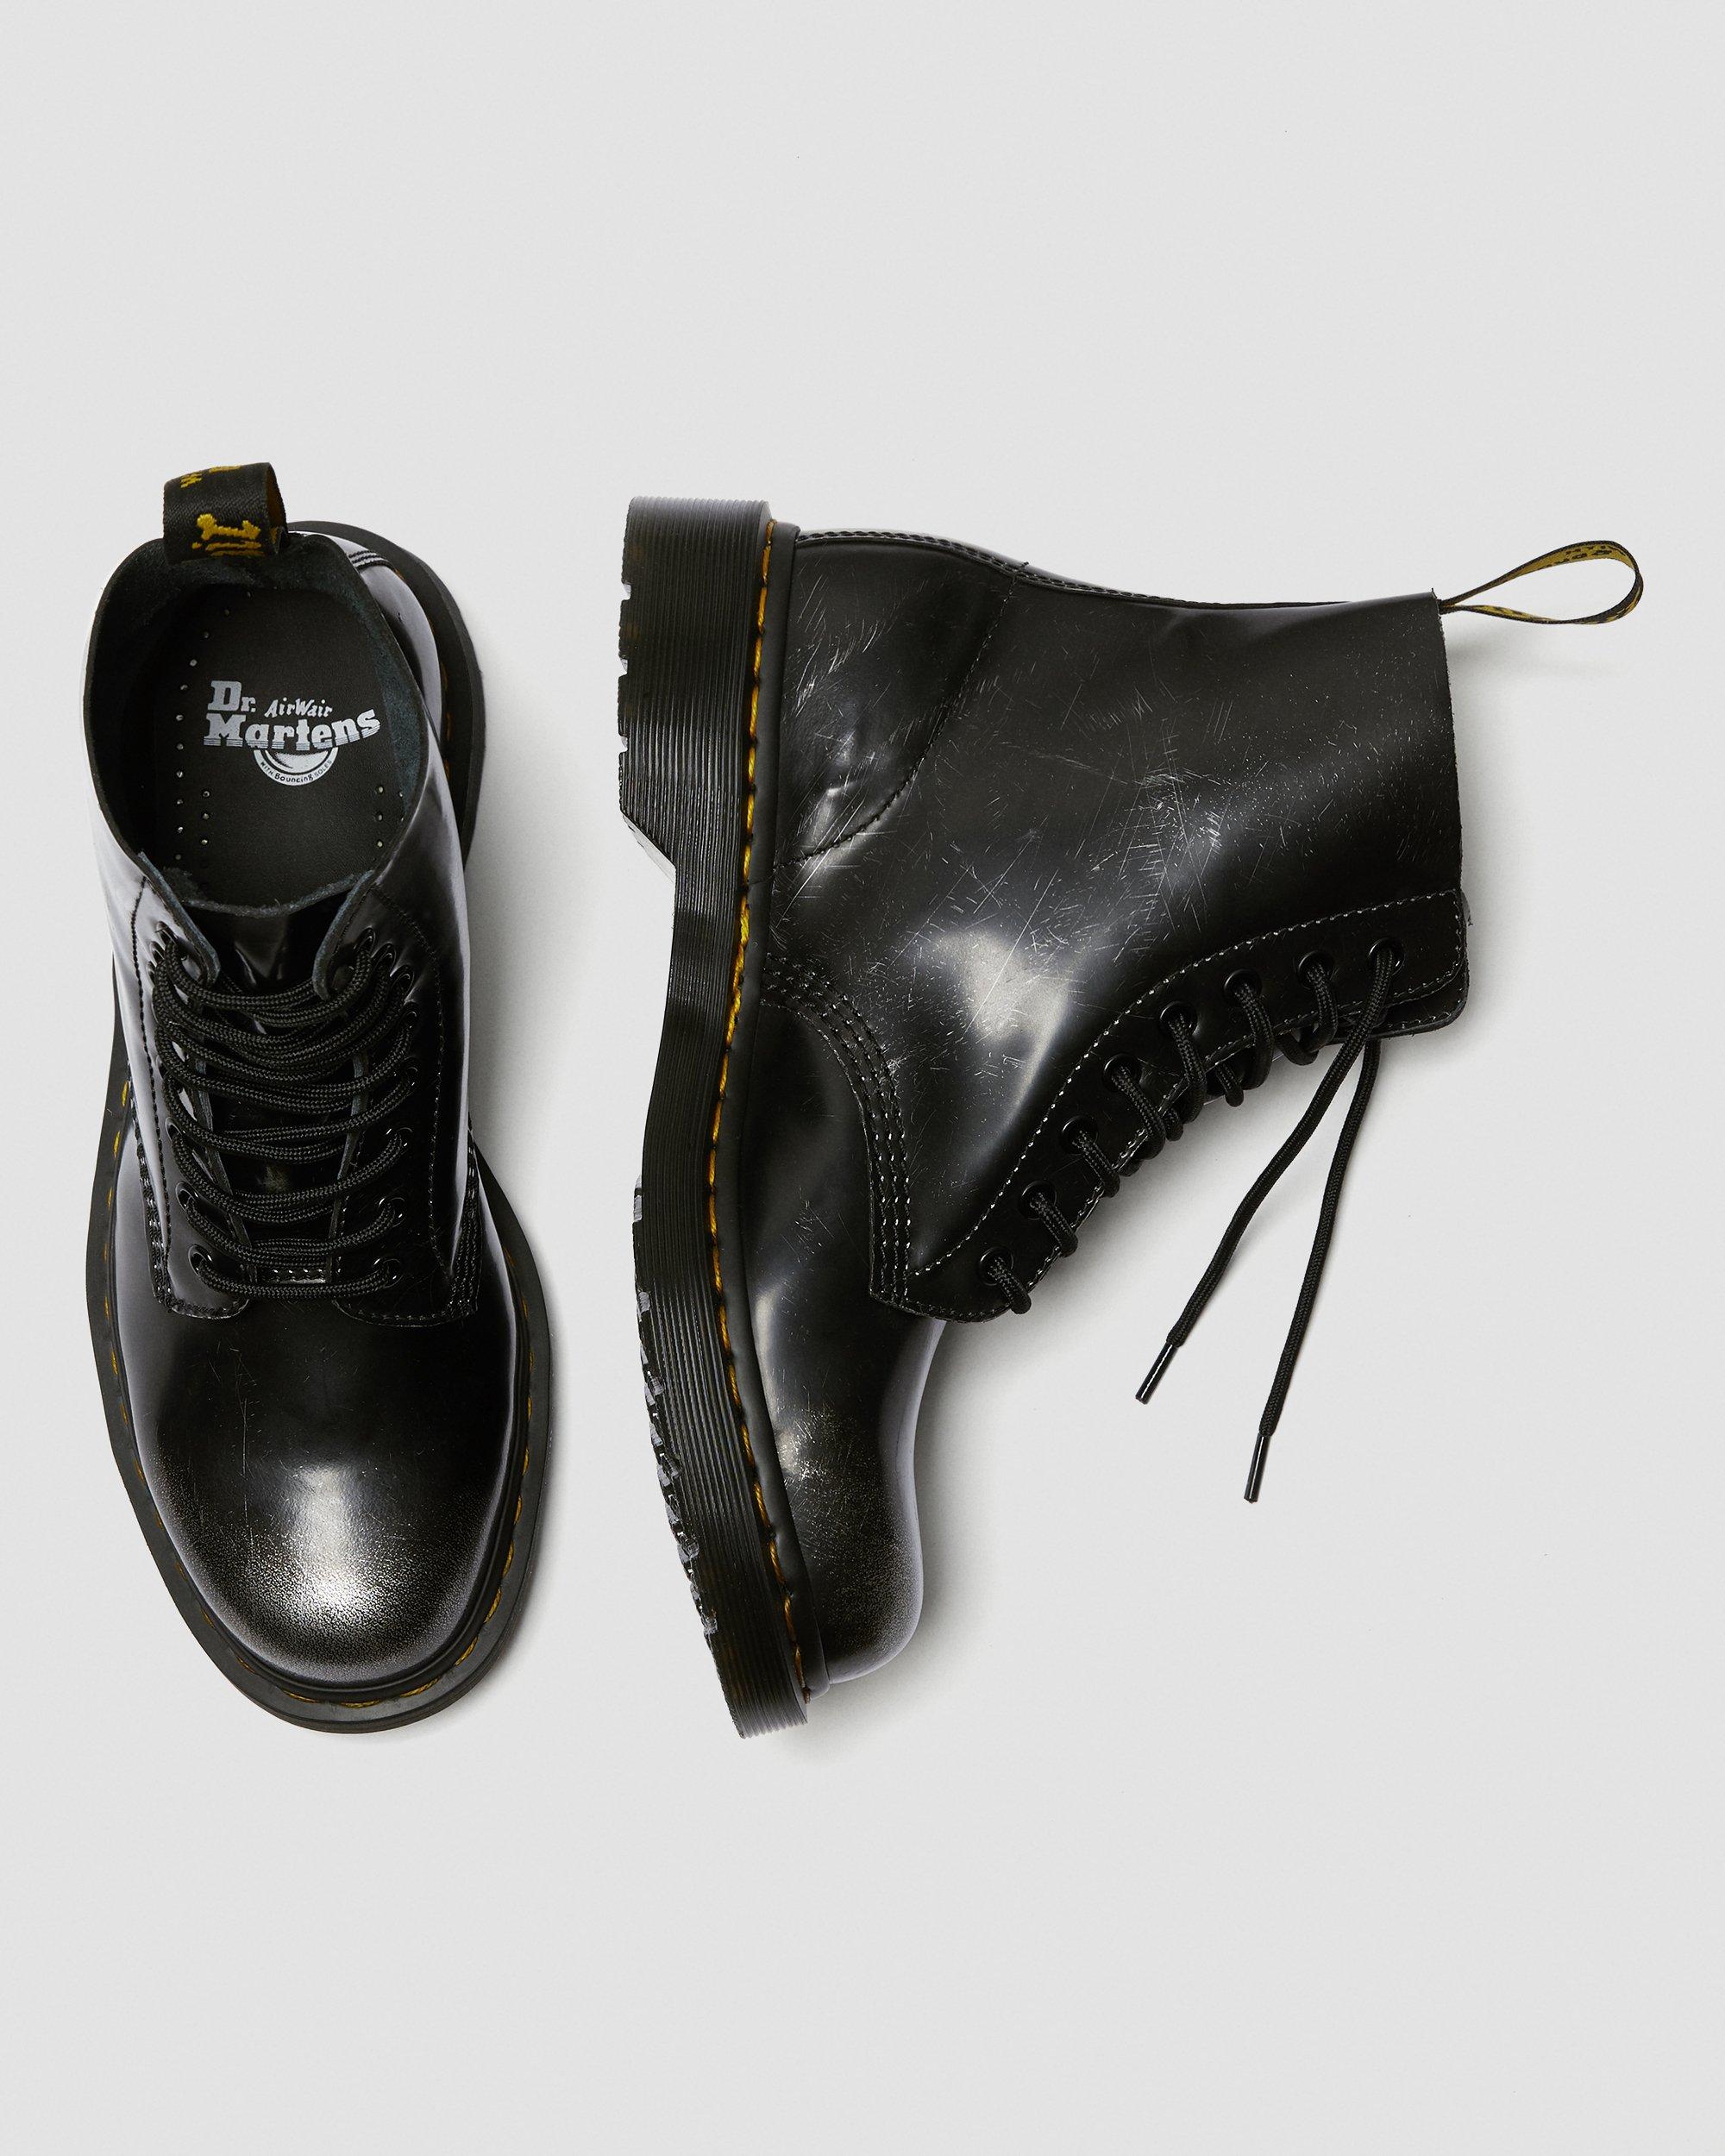 Canberra Bestrating Anesthesie 1460 Pascal Metallic Leather Lace Up Boots | Dr. Martens